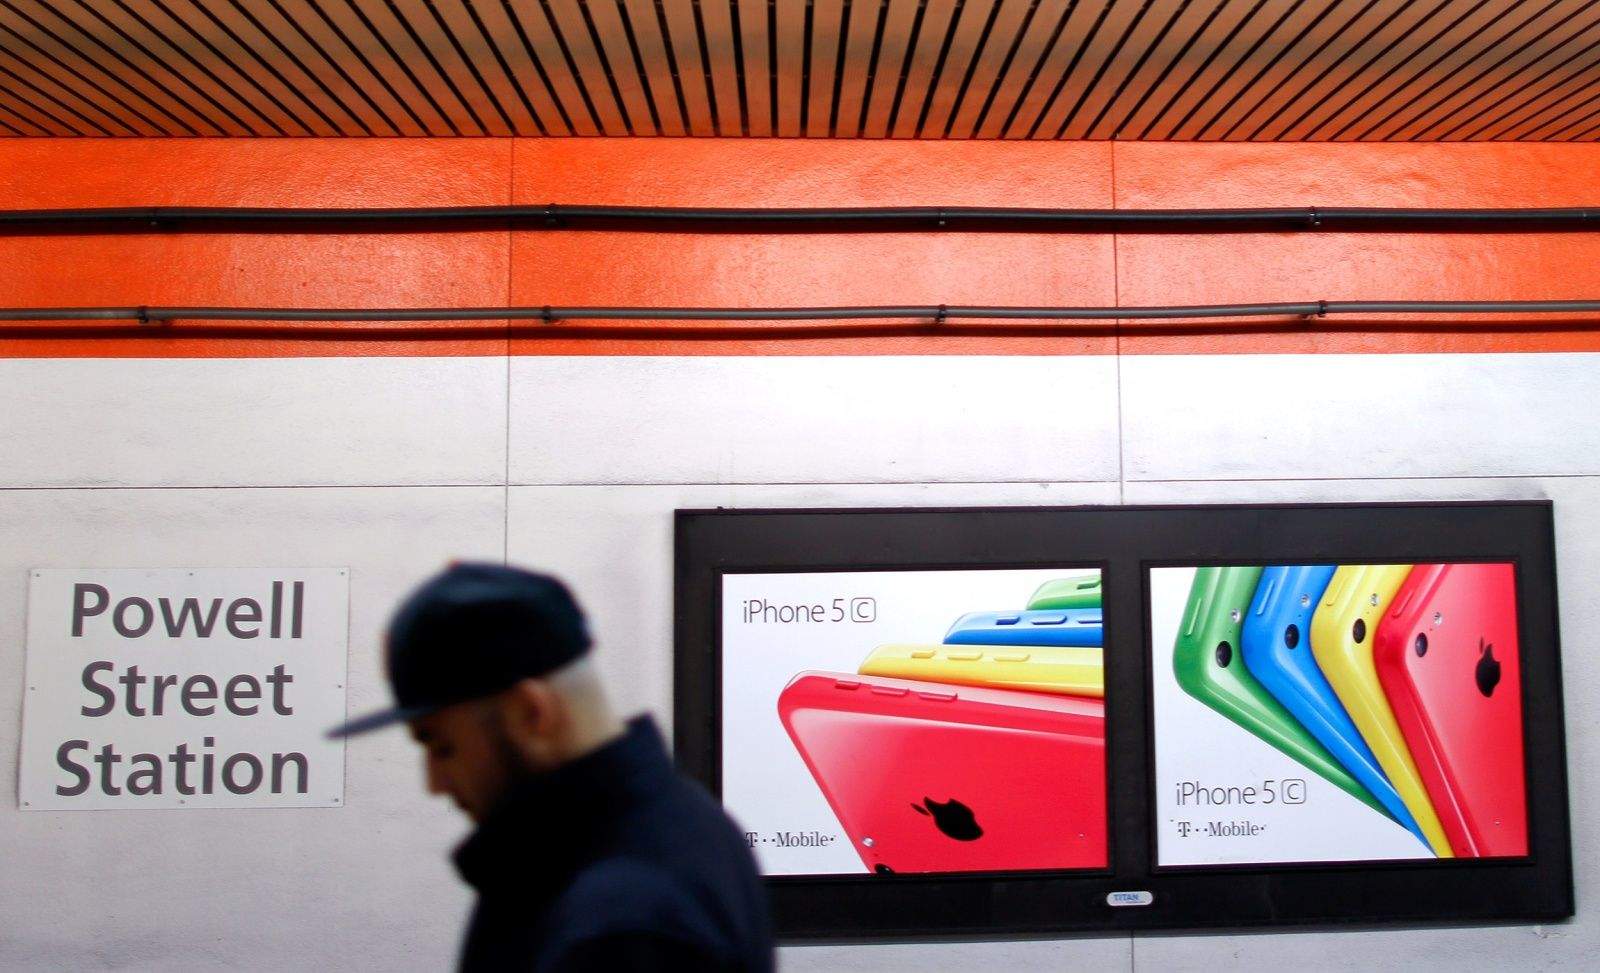 Apple iPhone 5c advertisment in the Powell Street BART Station in San Francisco, CA. Photo: Jim Merithew/Cult of Mac